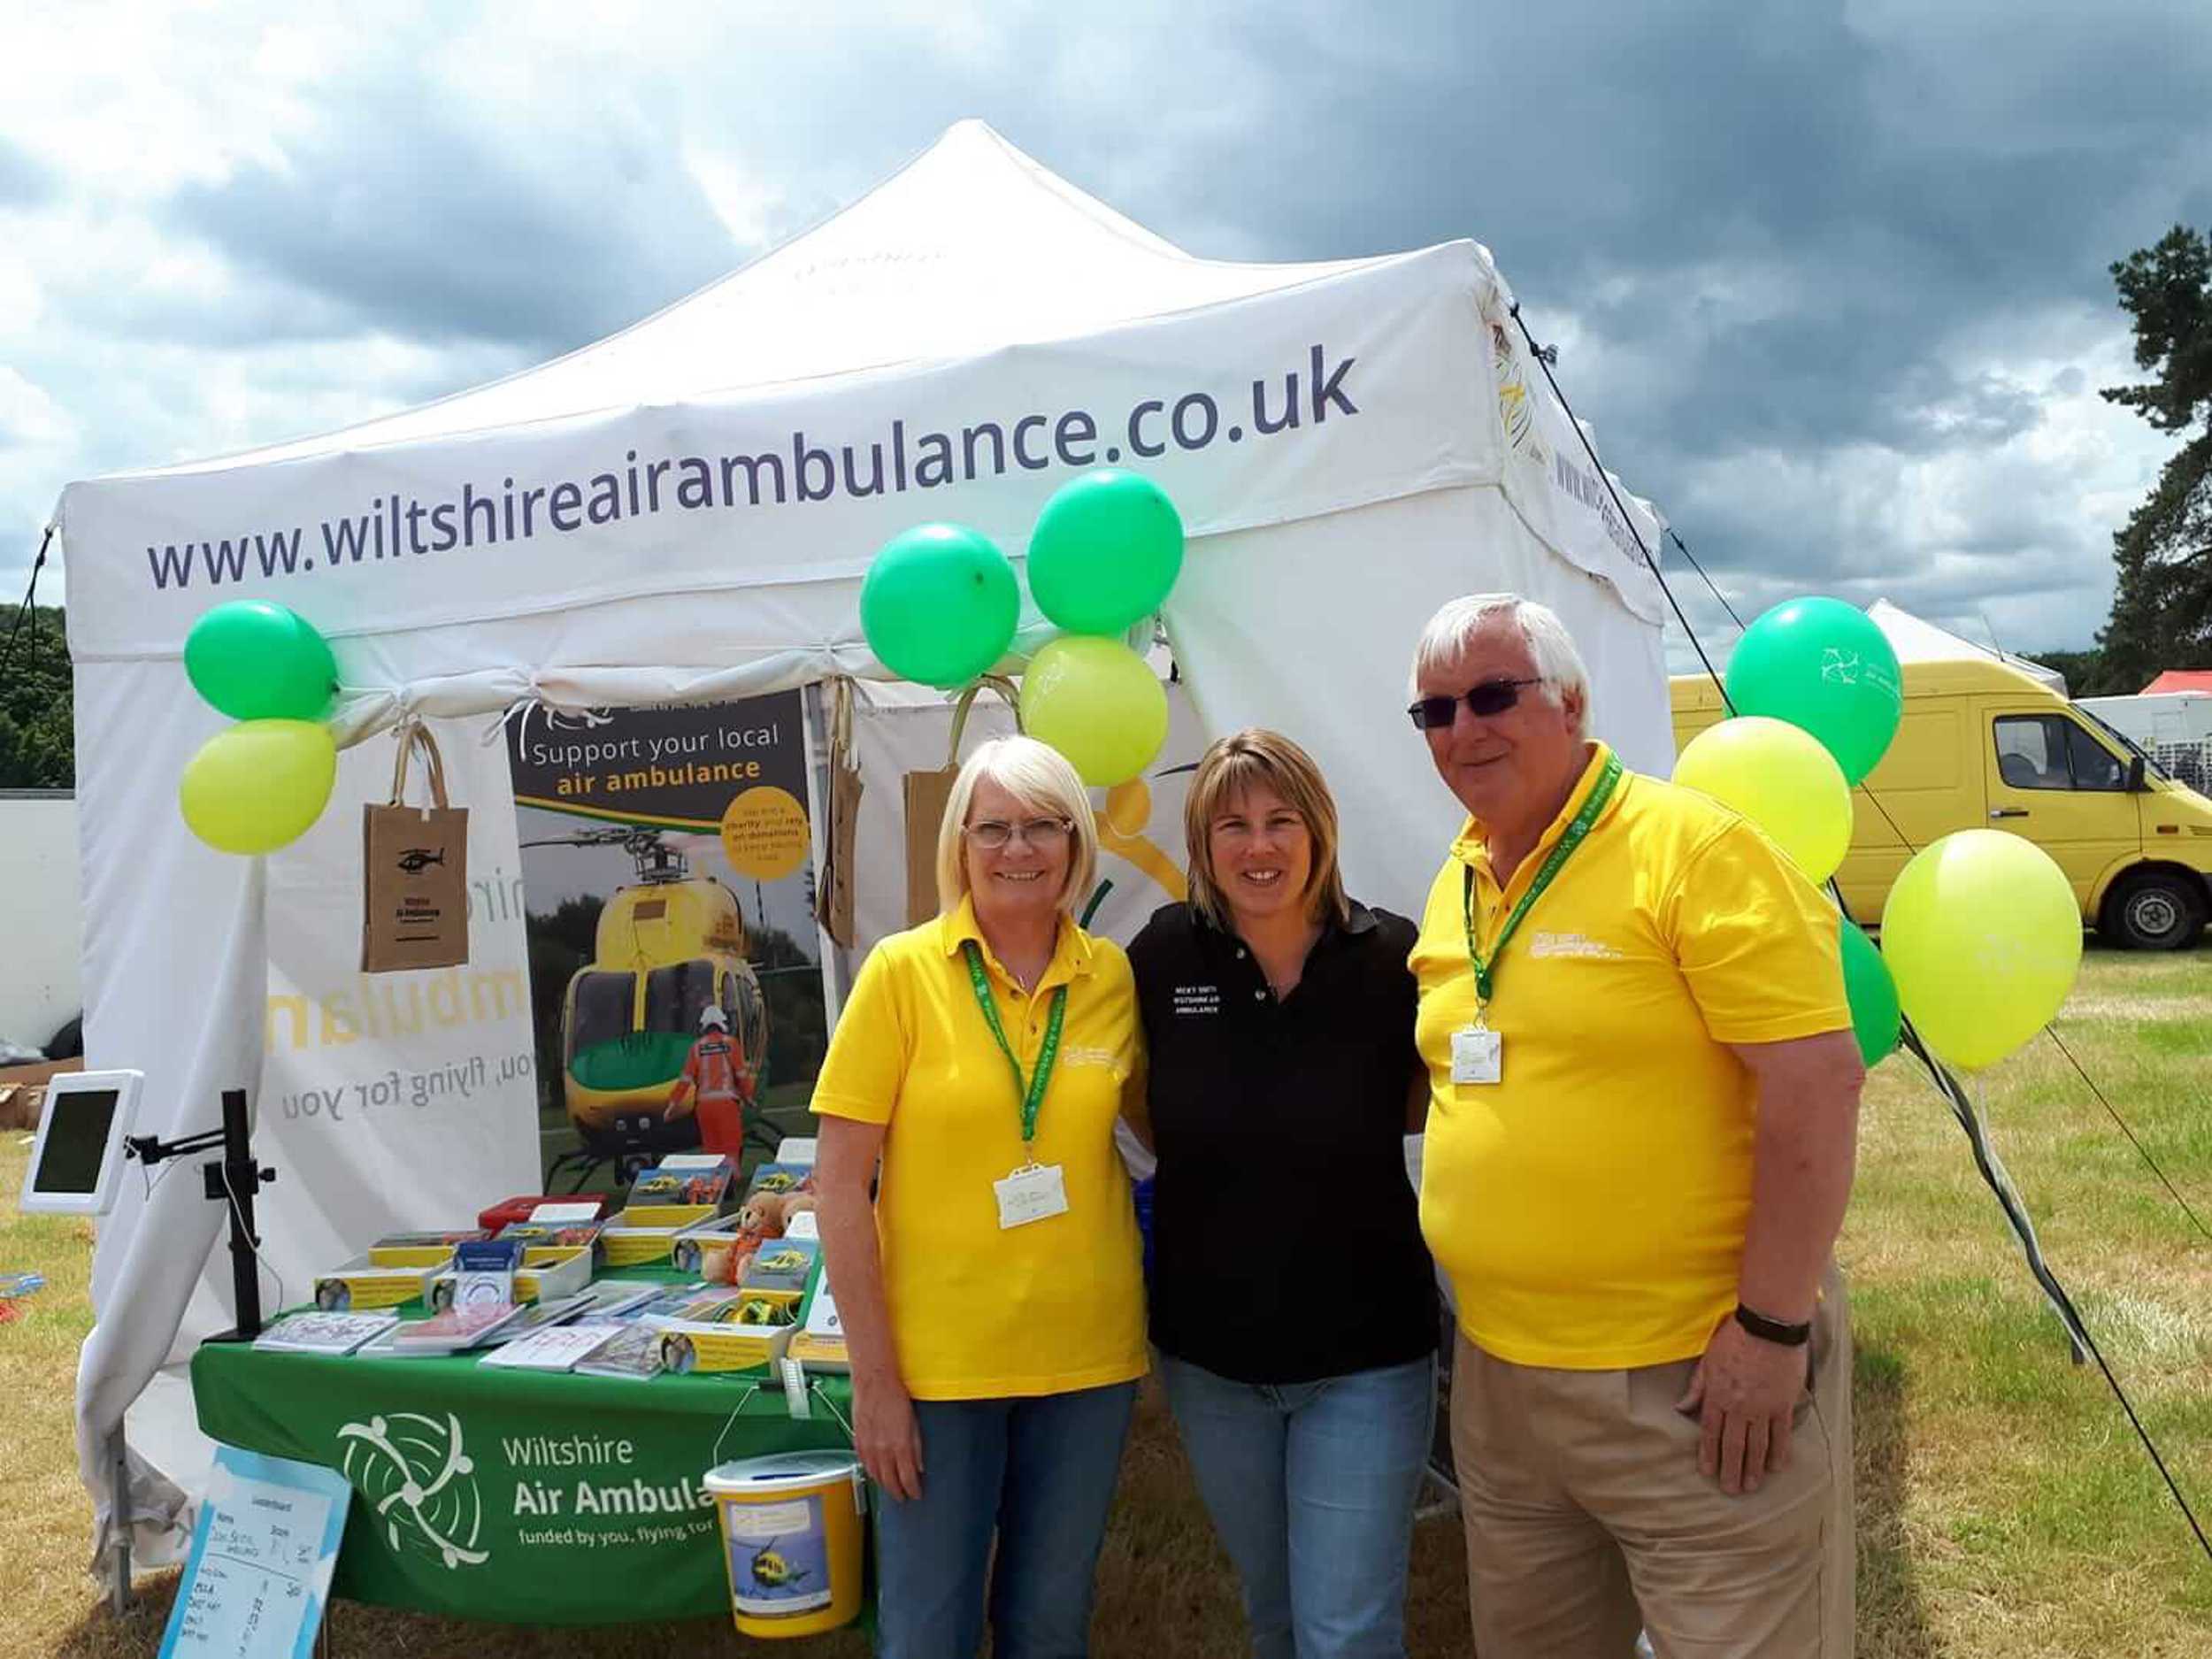 A photo of two Wiltshire Air Ambulance volunteers at an event with a Wiltshire Air Ambulance pilot. The photo is in front of a white gazebo with event merchandise.